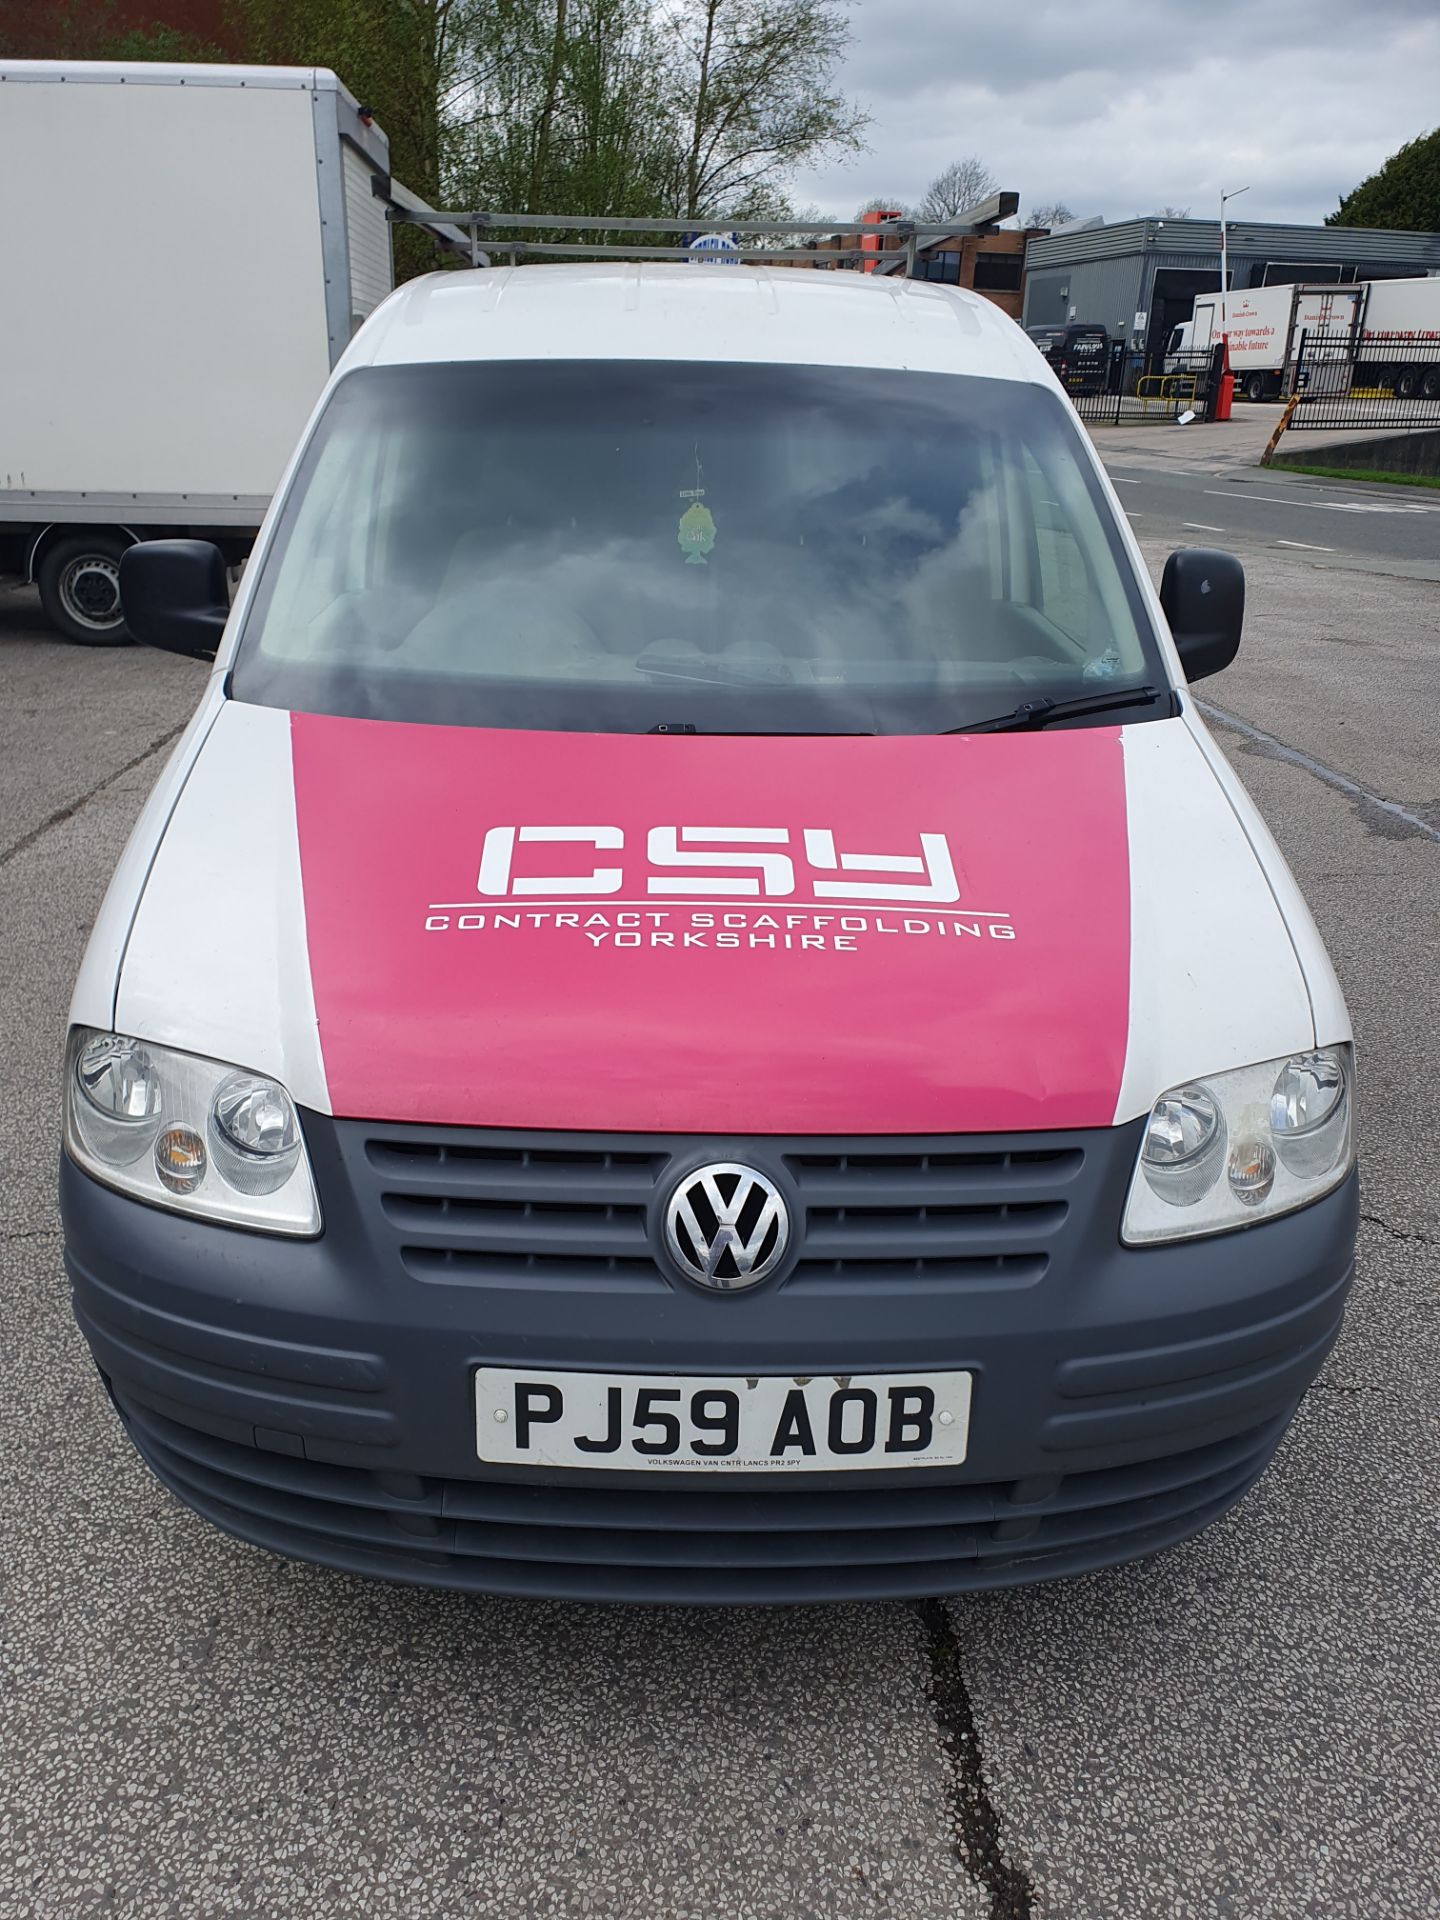 Volkswagen Caddy C20 TDI 104 | PJ59 AOB | Manual | White | 147,369 Miles | Fly Wheel Needs Changing* - Image 2 of 15